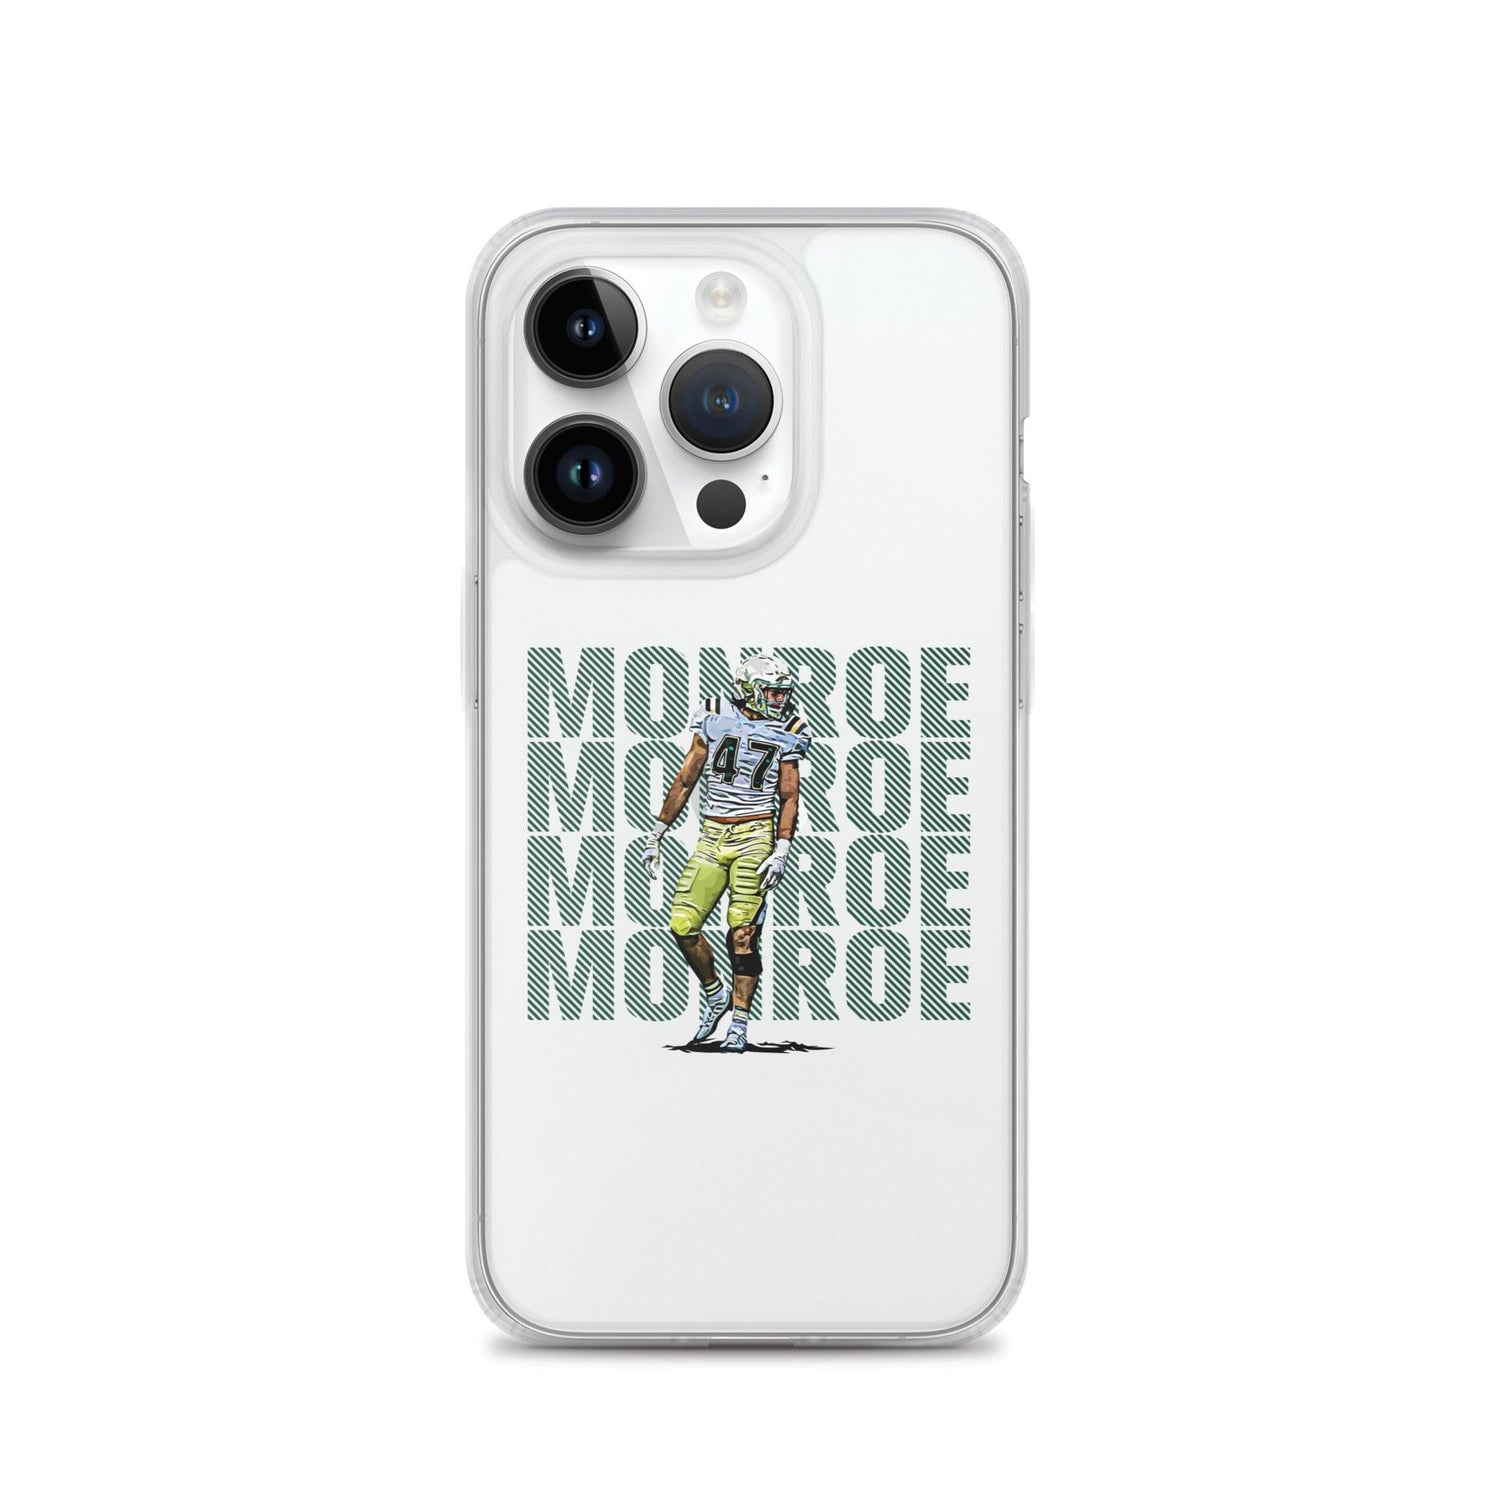 Chase Monroe "Gameday" iPhone Case - Fan Arch